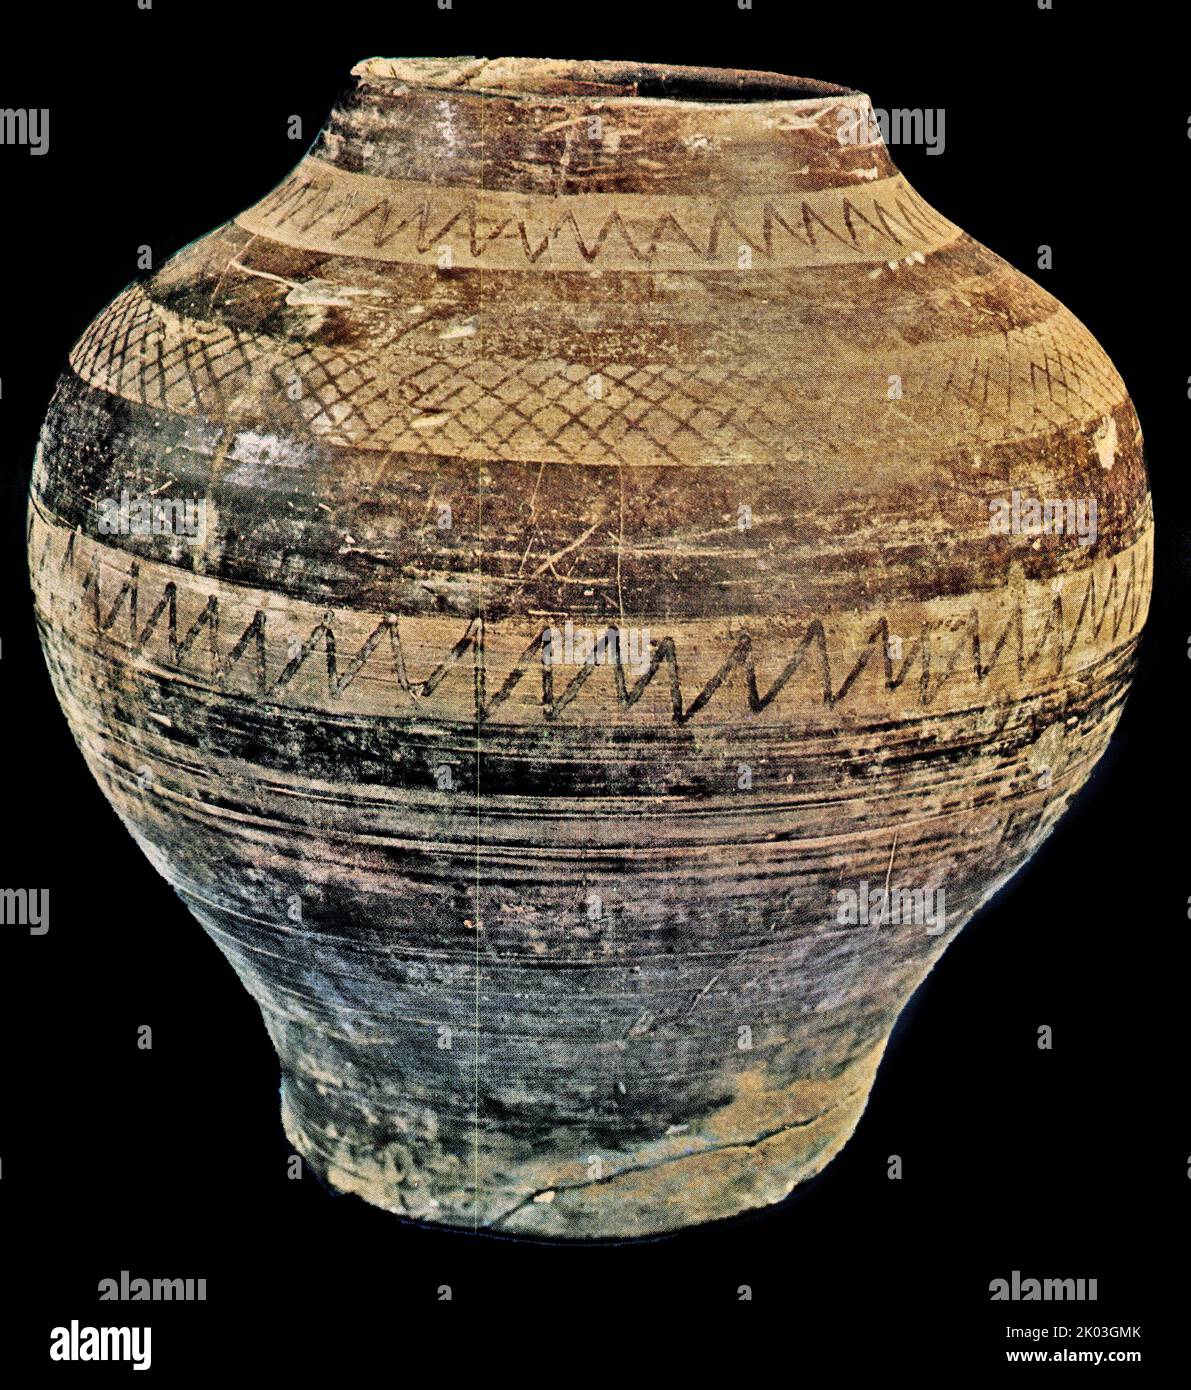 Warring States Period pottery excavated at Guangwu area, Henan Province in 1928. The soil of the pottery is firm and fine and dark in colour. The pottery has a flat mouth, broad shoulders, a large belly, and a flat bottom. It is painted with smooth hard stones or other similar tools, and the painted places show the smooth nature of clay. This method was commonly used by those who made black pottery at that time. Stock Photo